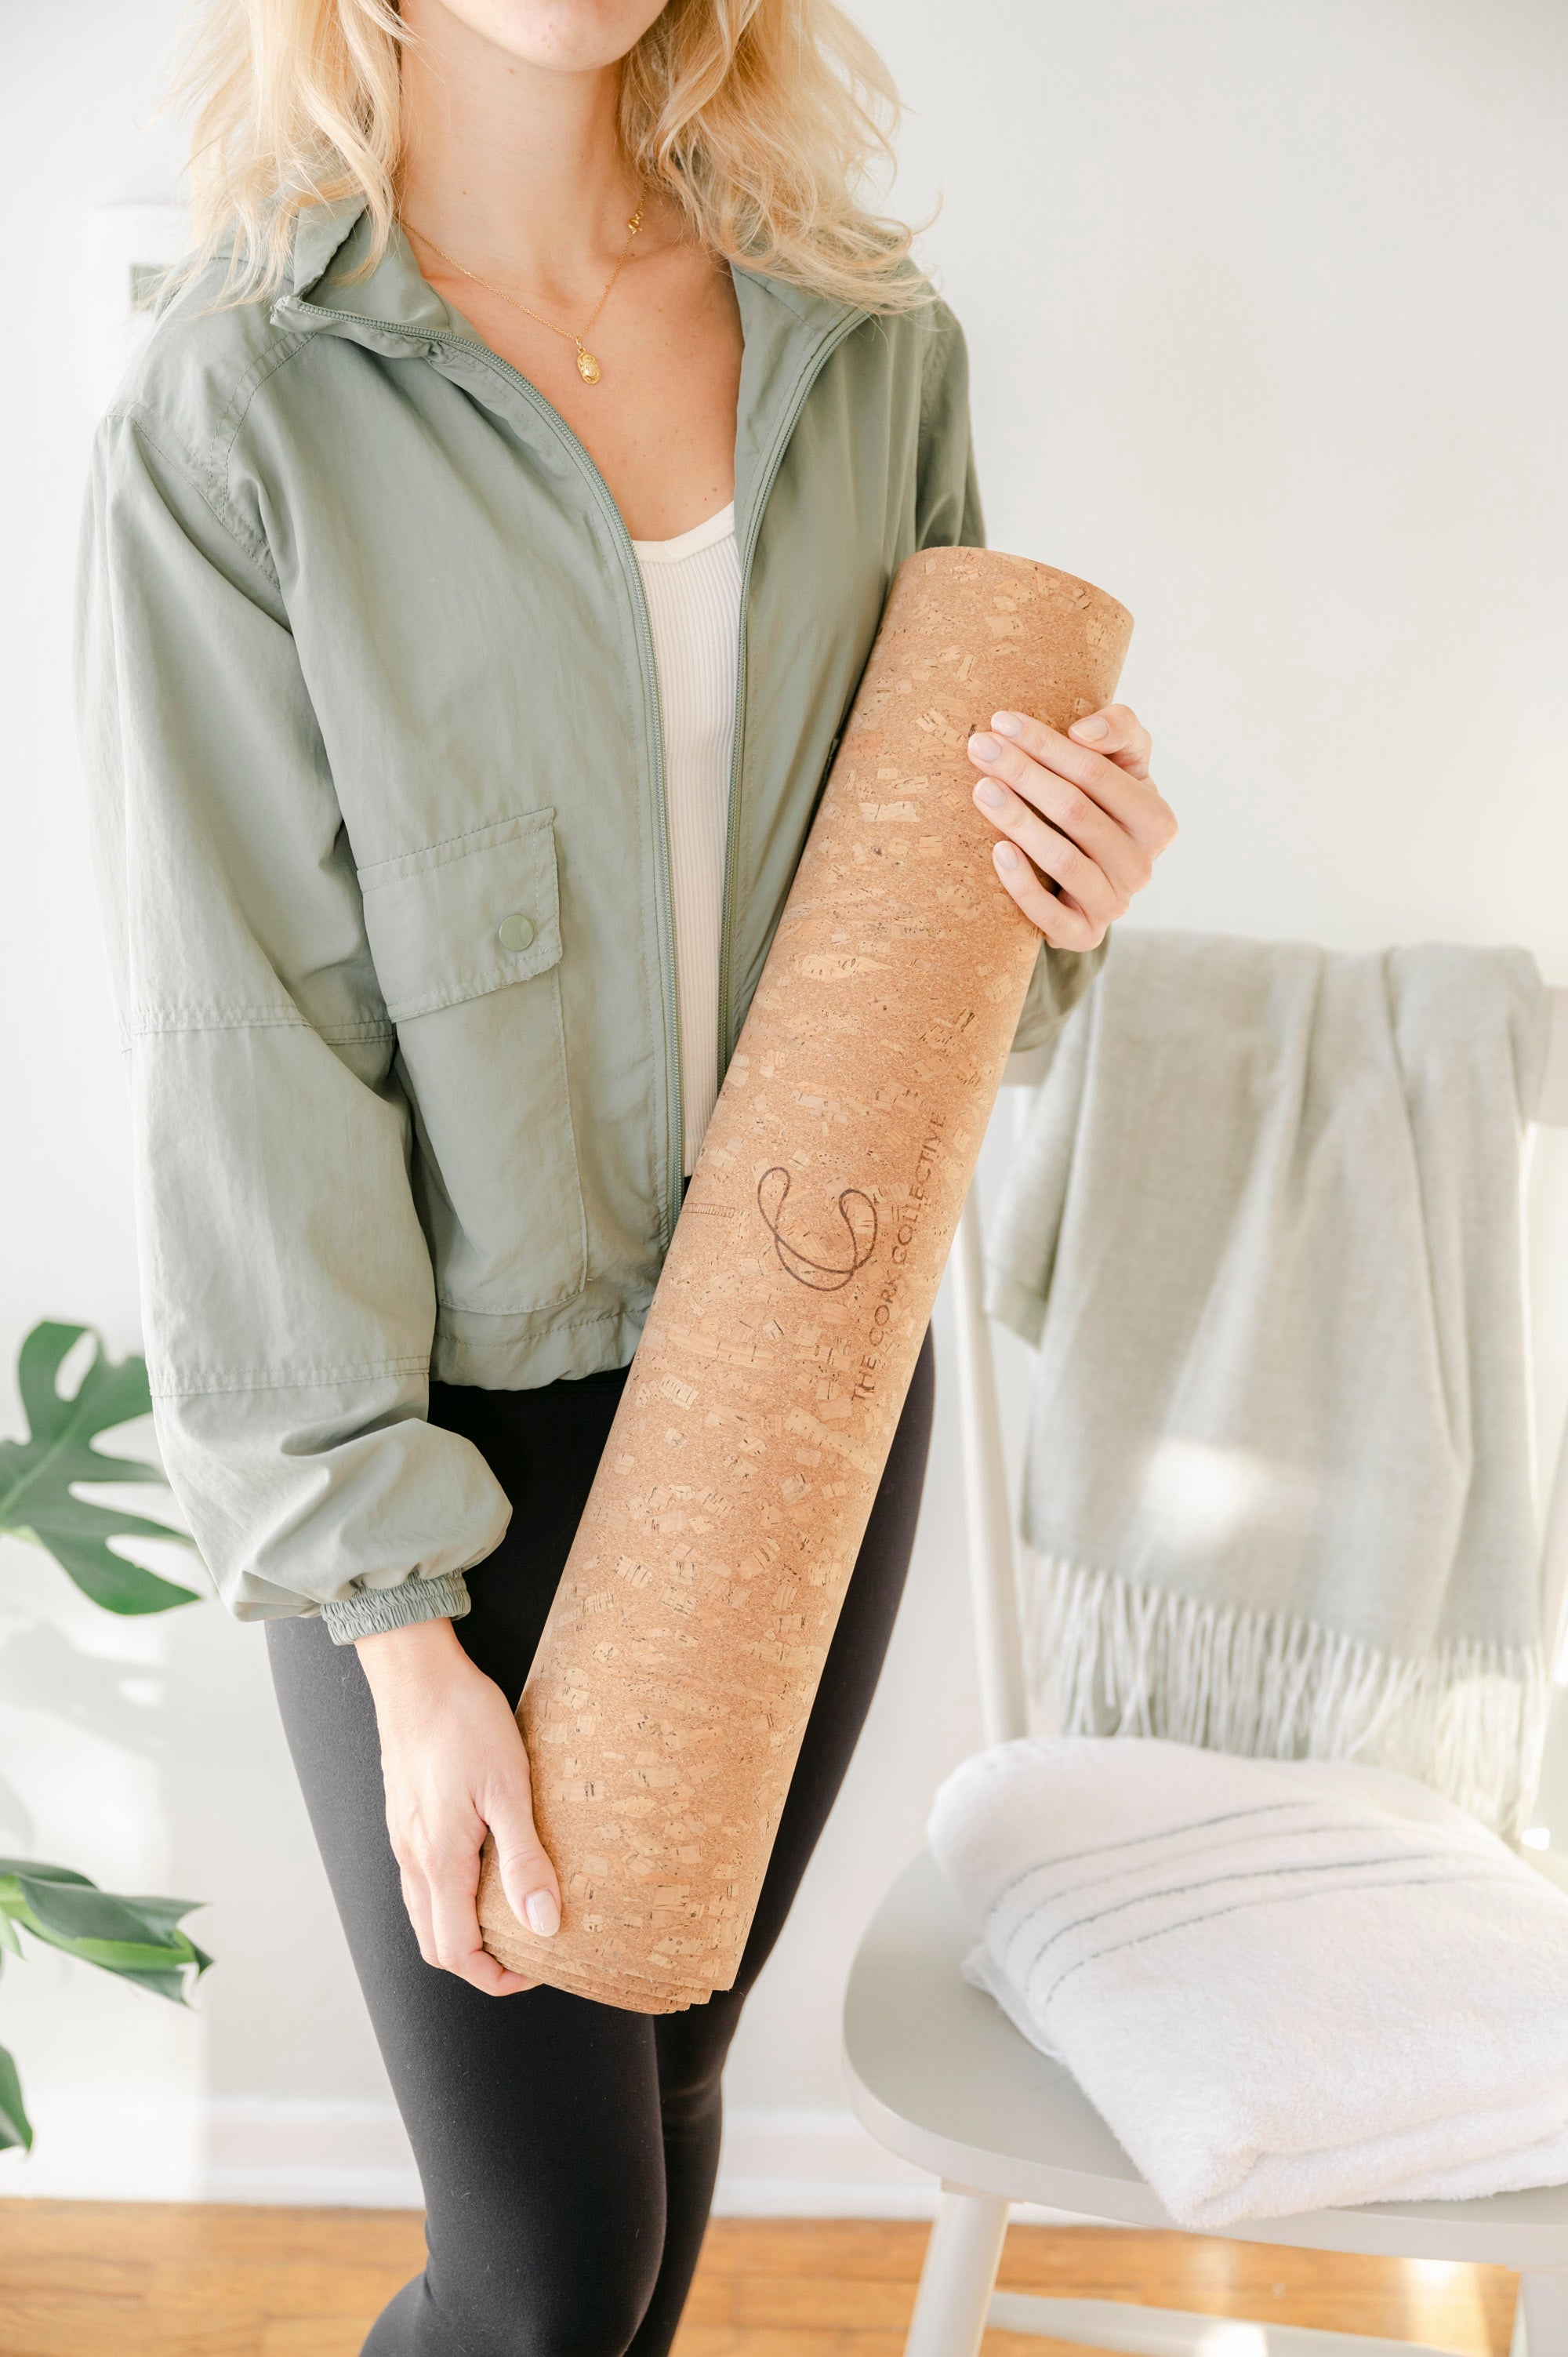 Finding Zen at Home: The Best Ways to Practice Yoga with a Cork Yoga Mat - thecorkcollective.web